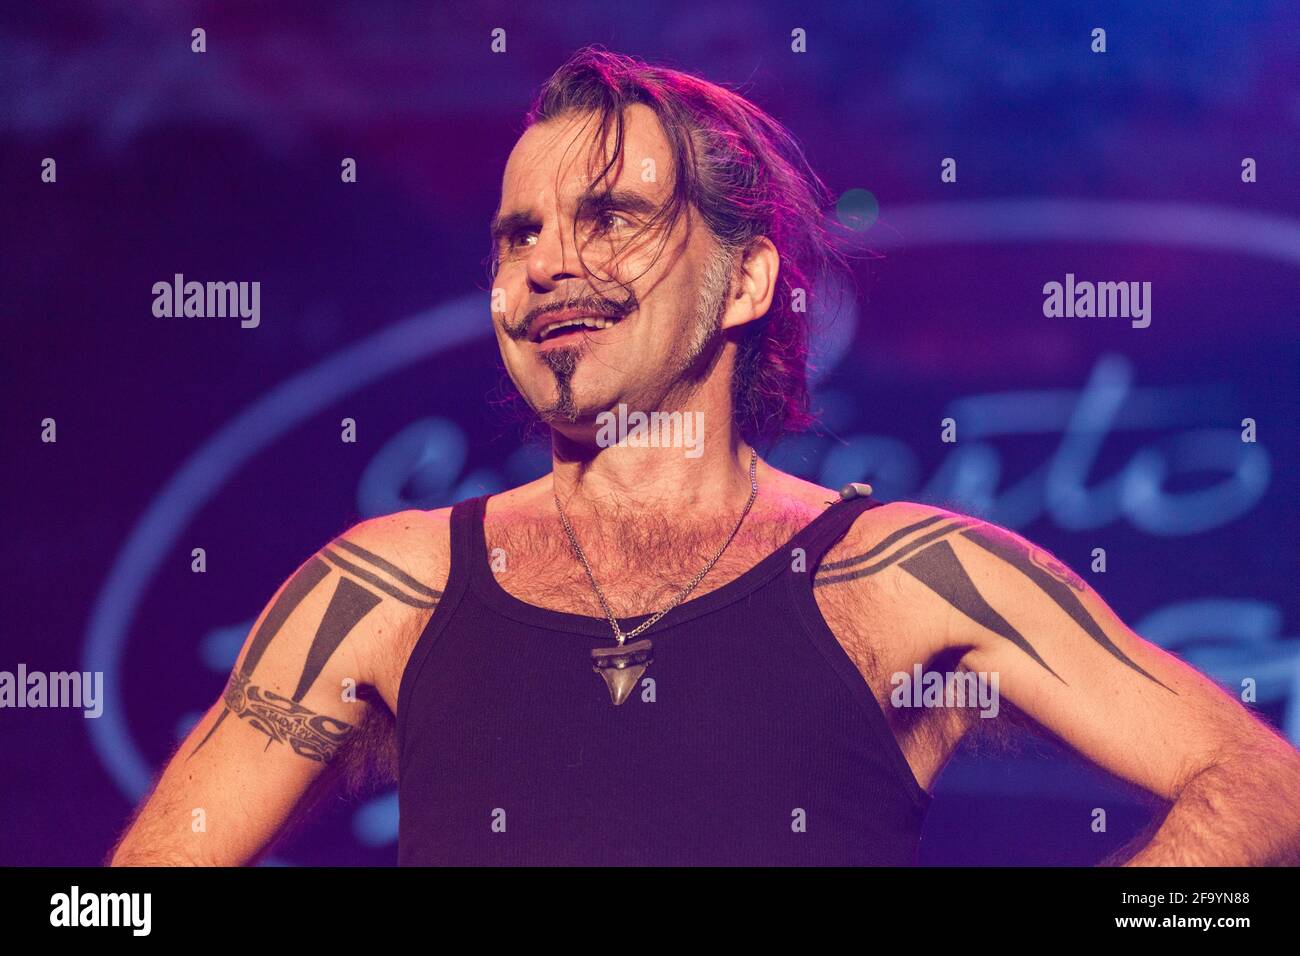 Italian Singer, Piero Pelù and his band performs at 1th may concert, Rome 2014 Stock Photo